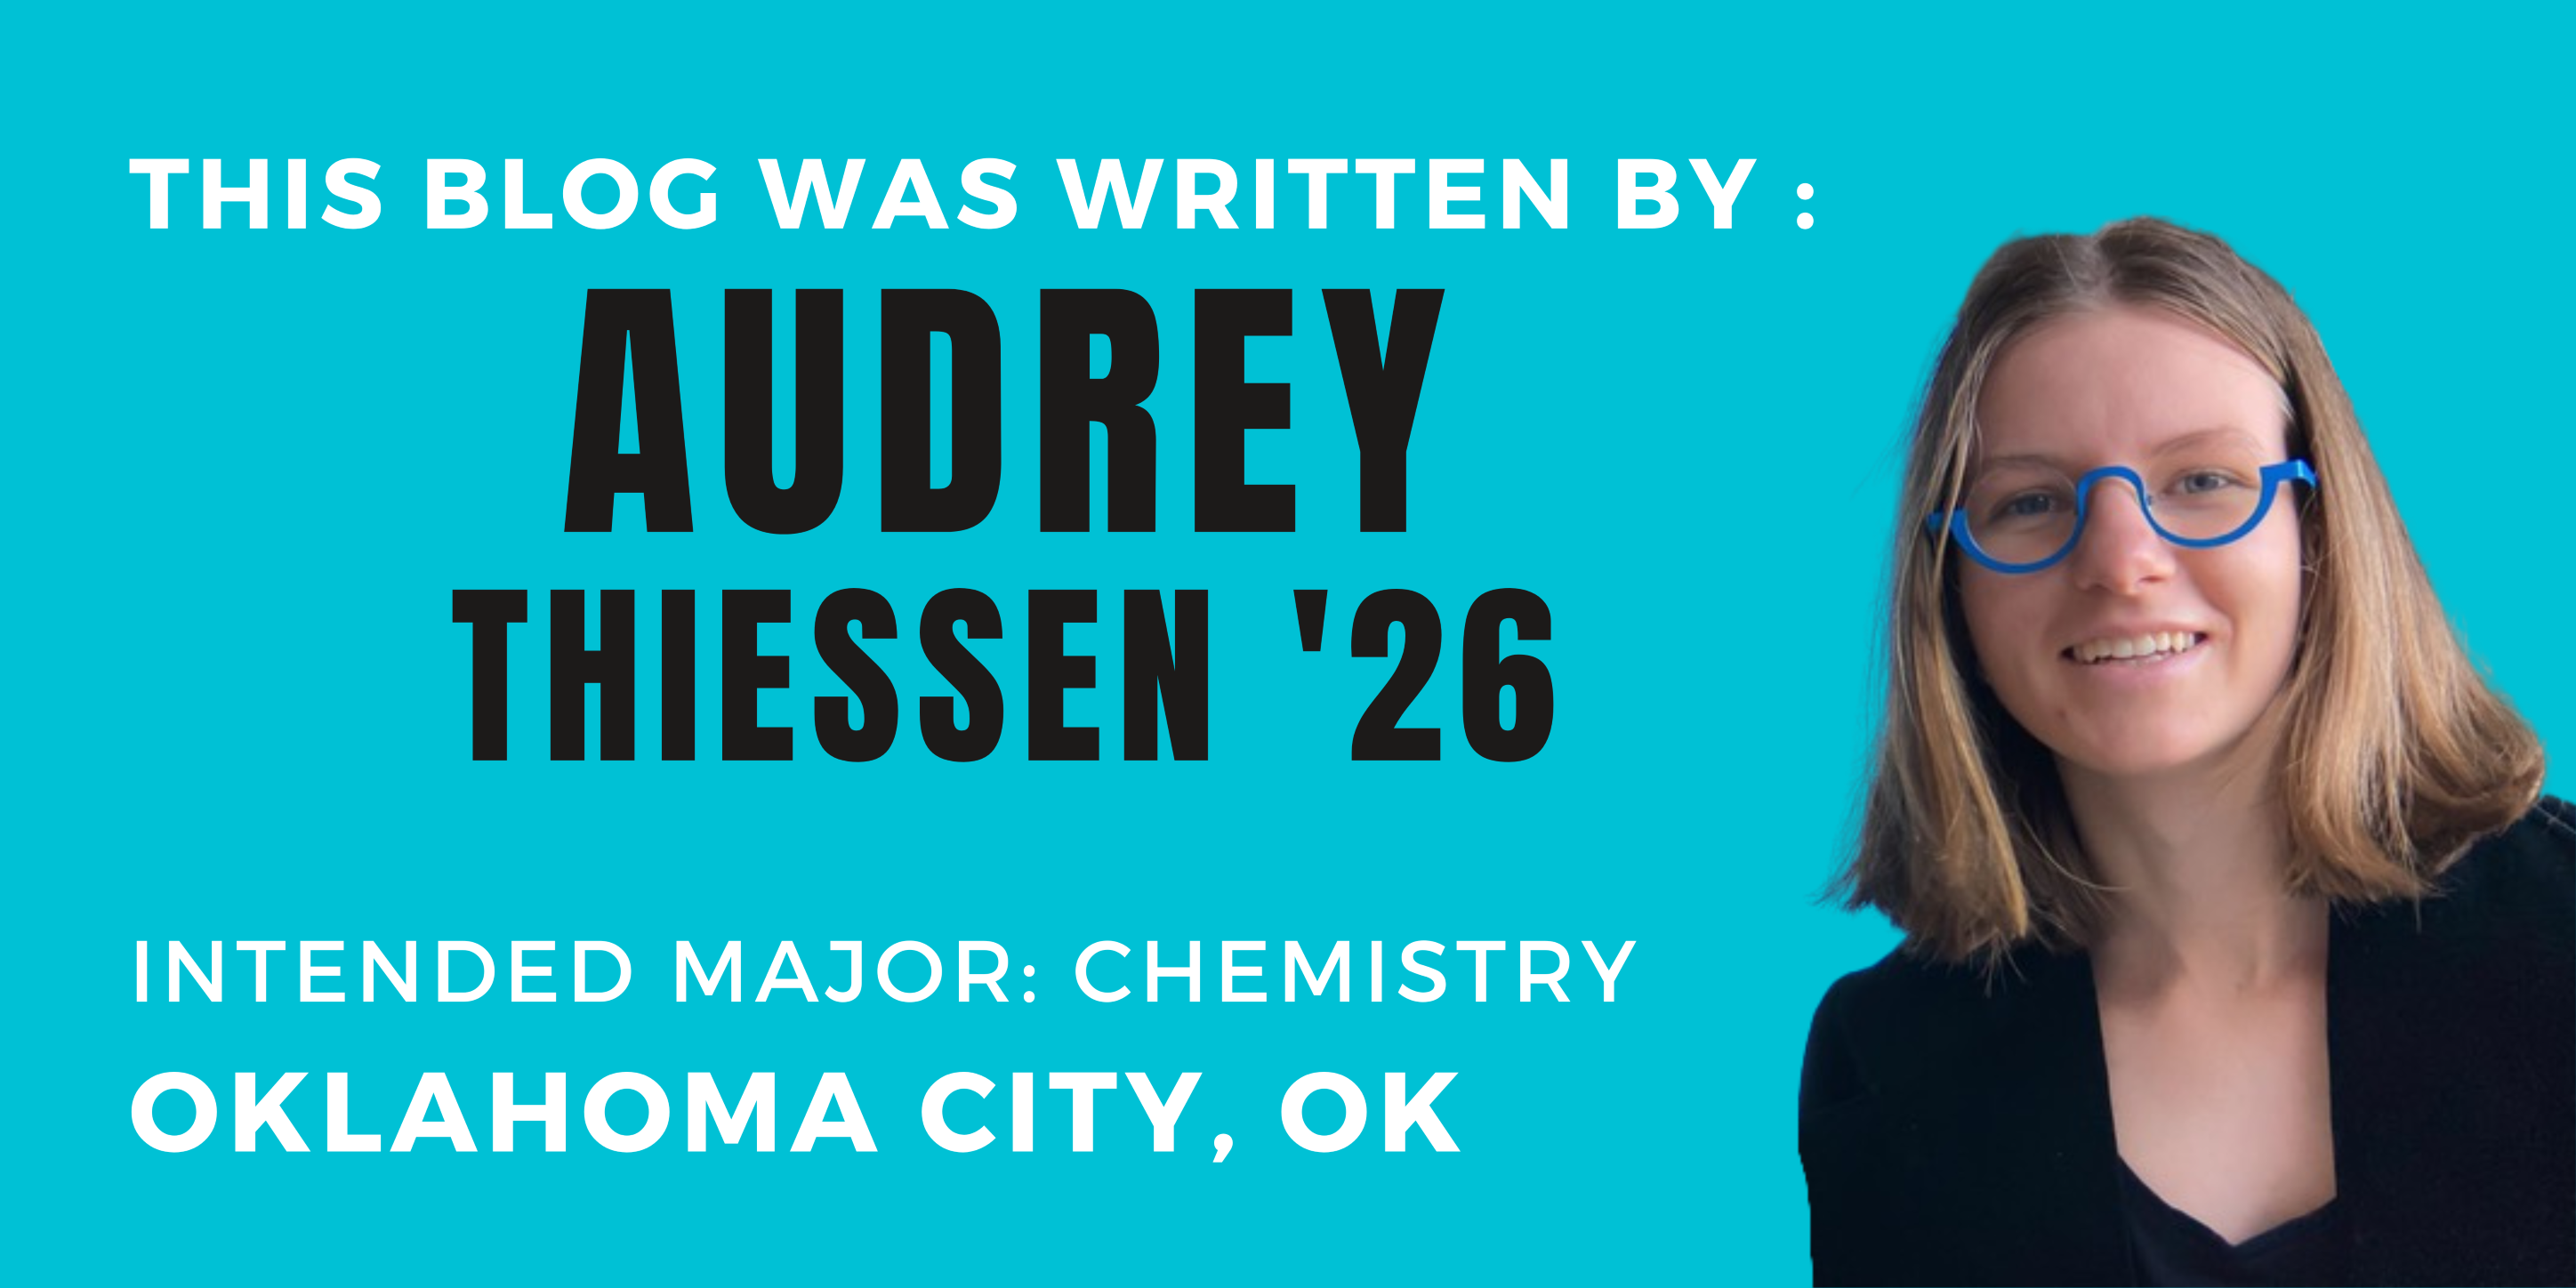 This blog was written by: Audrey Thiessen '26; Intended major: Chemistry; Oklahoma City, OK